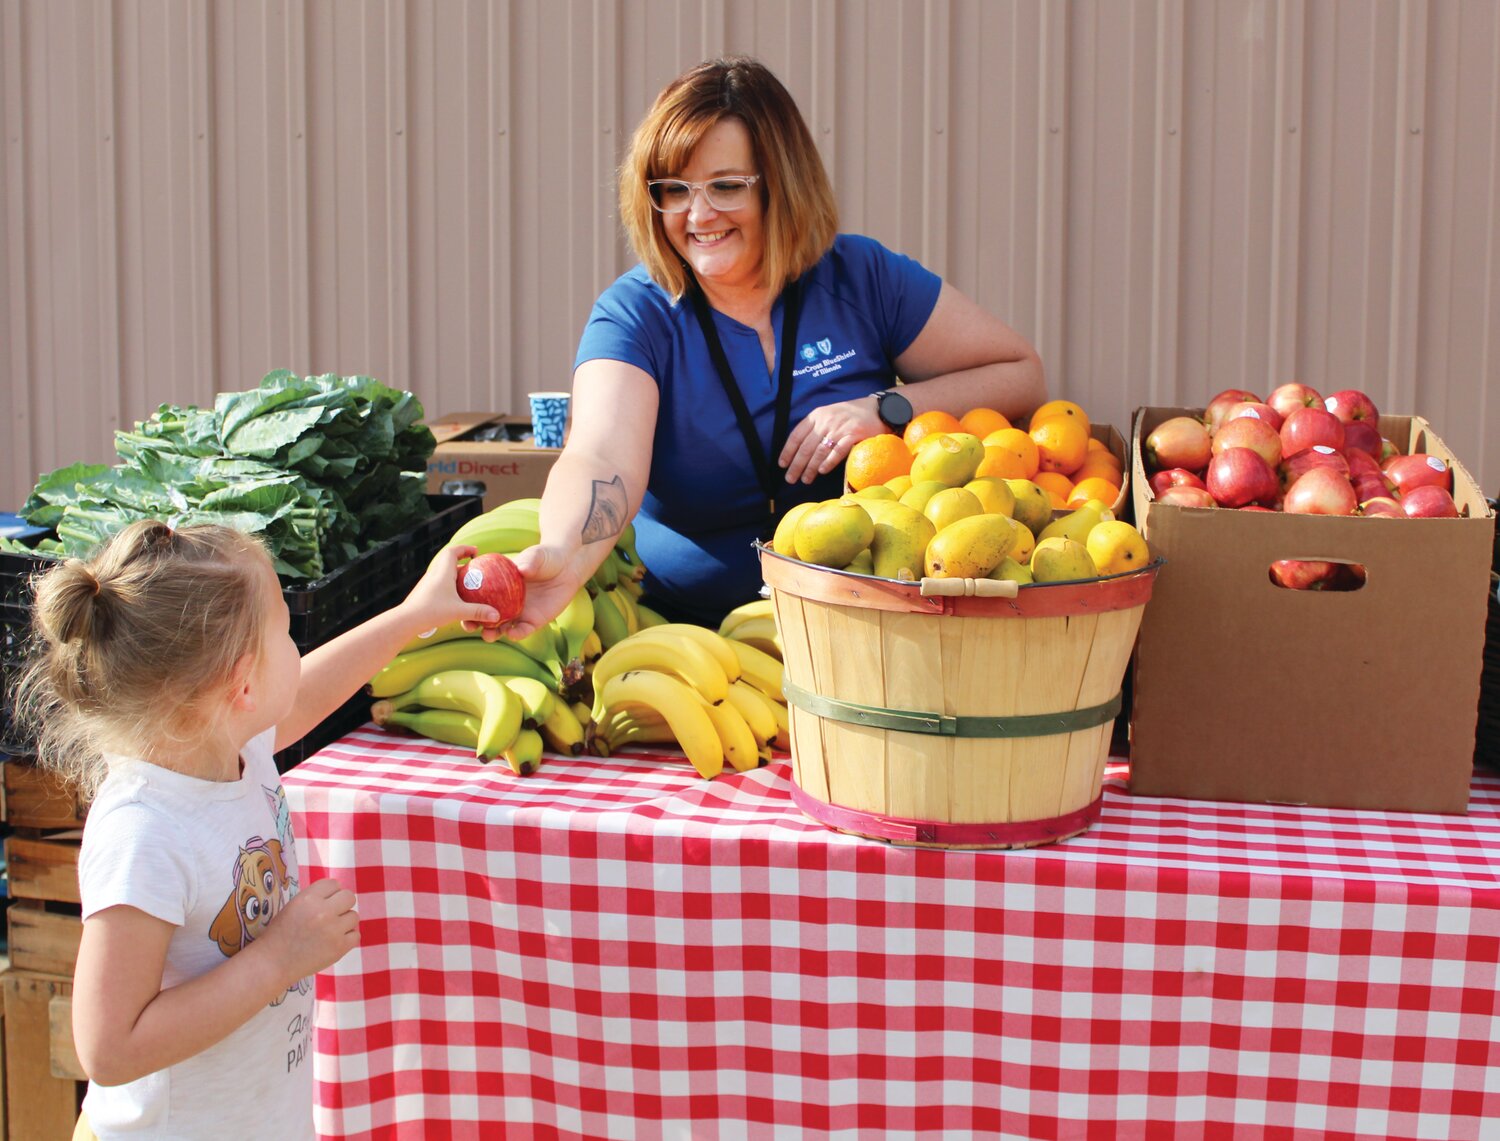 Four-year-old Ellison Wagoner gets fresh produce from Blue Cross and Blue Shield’s Community Relations Coordinator Heather Briggs, at the free produce market BCBS sponsored for the Celebrate Families event.